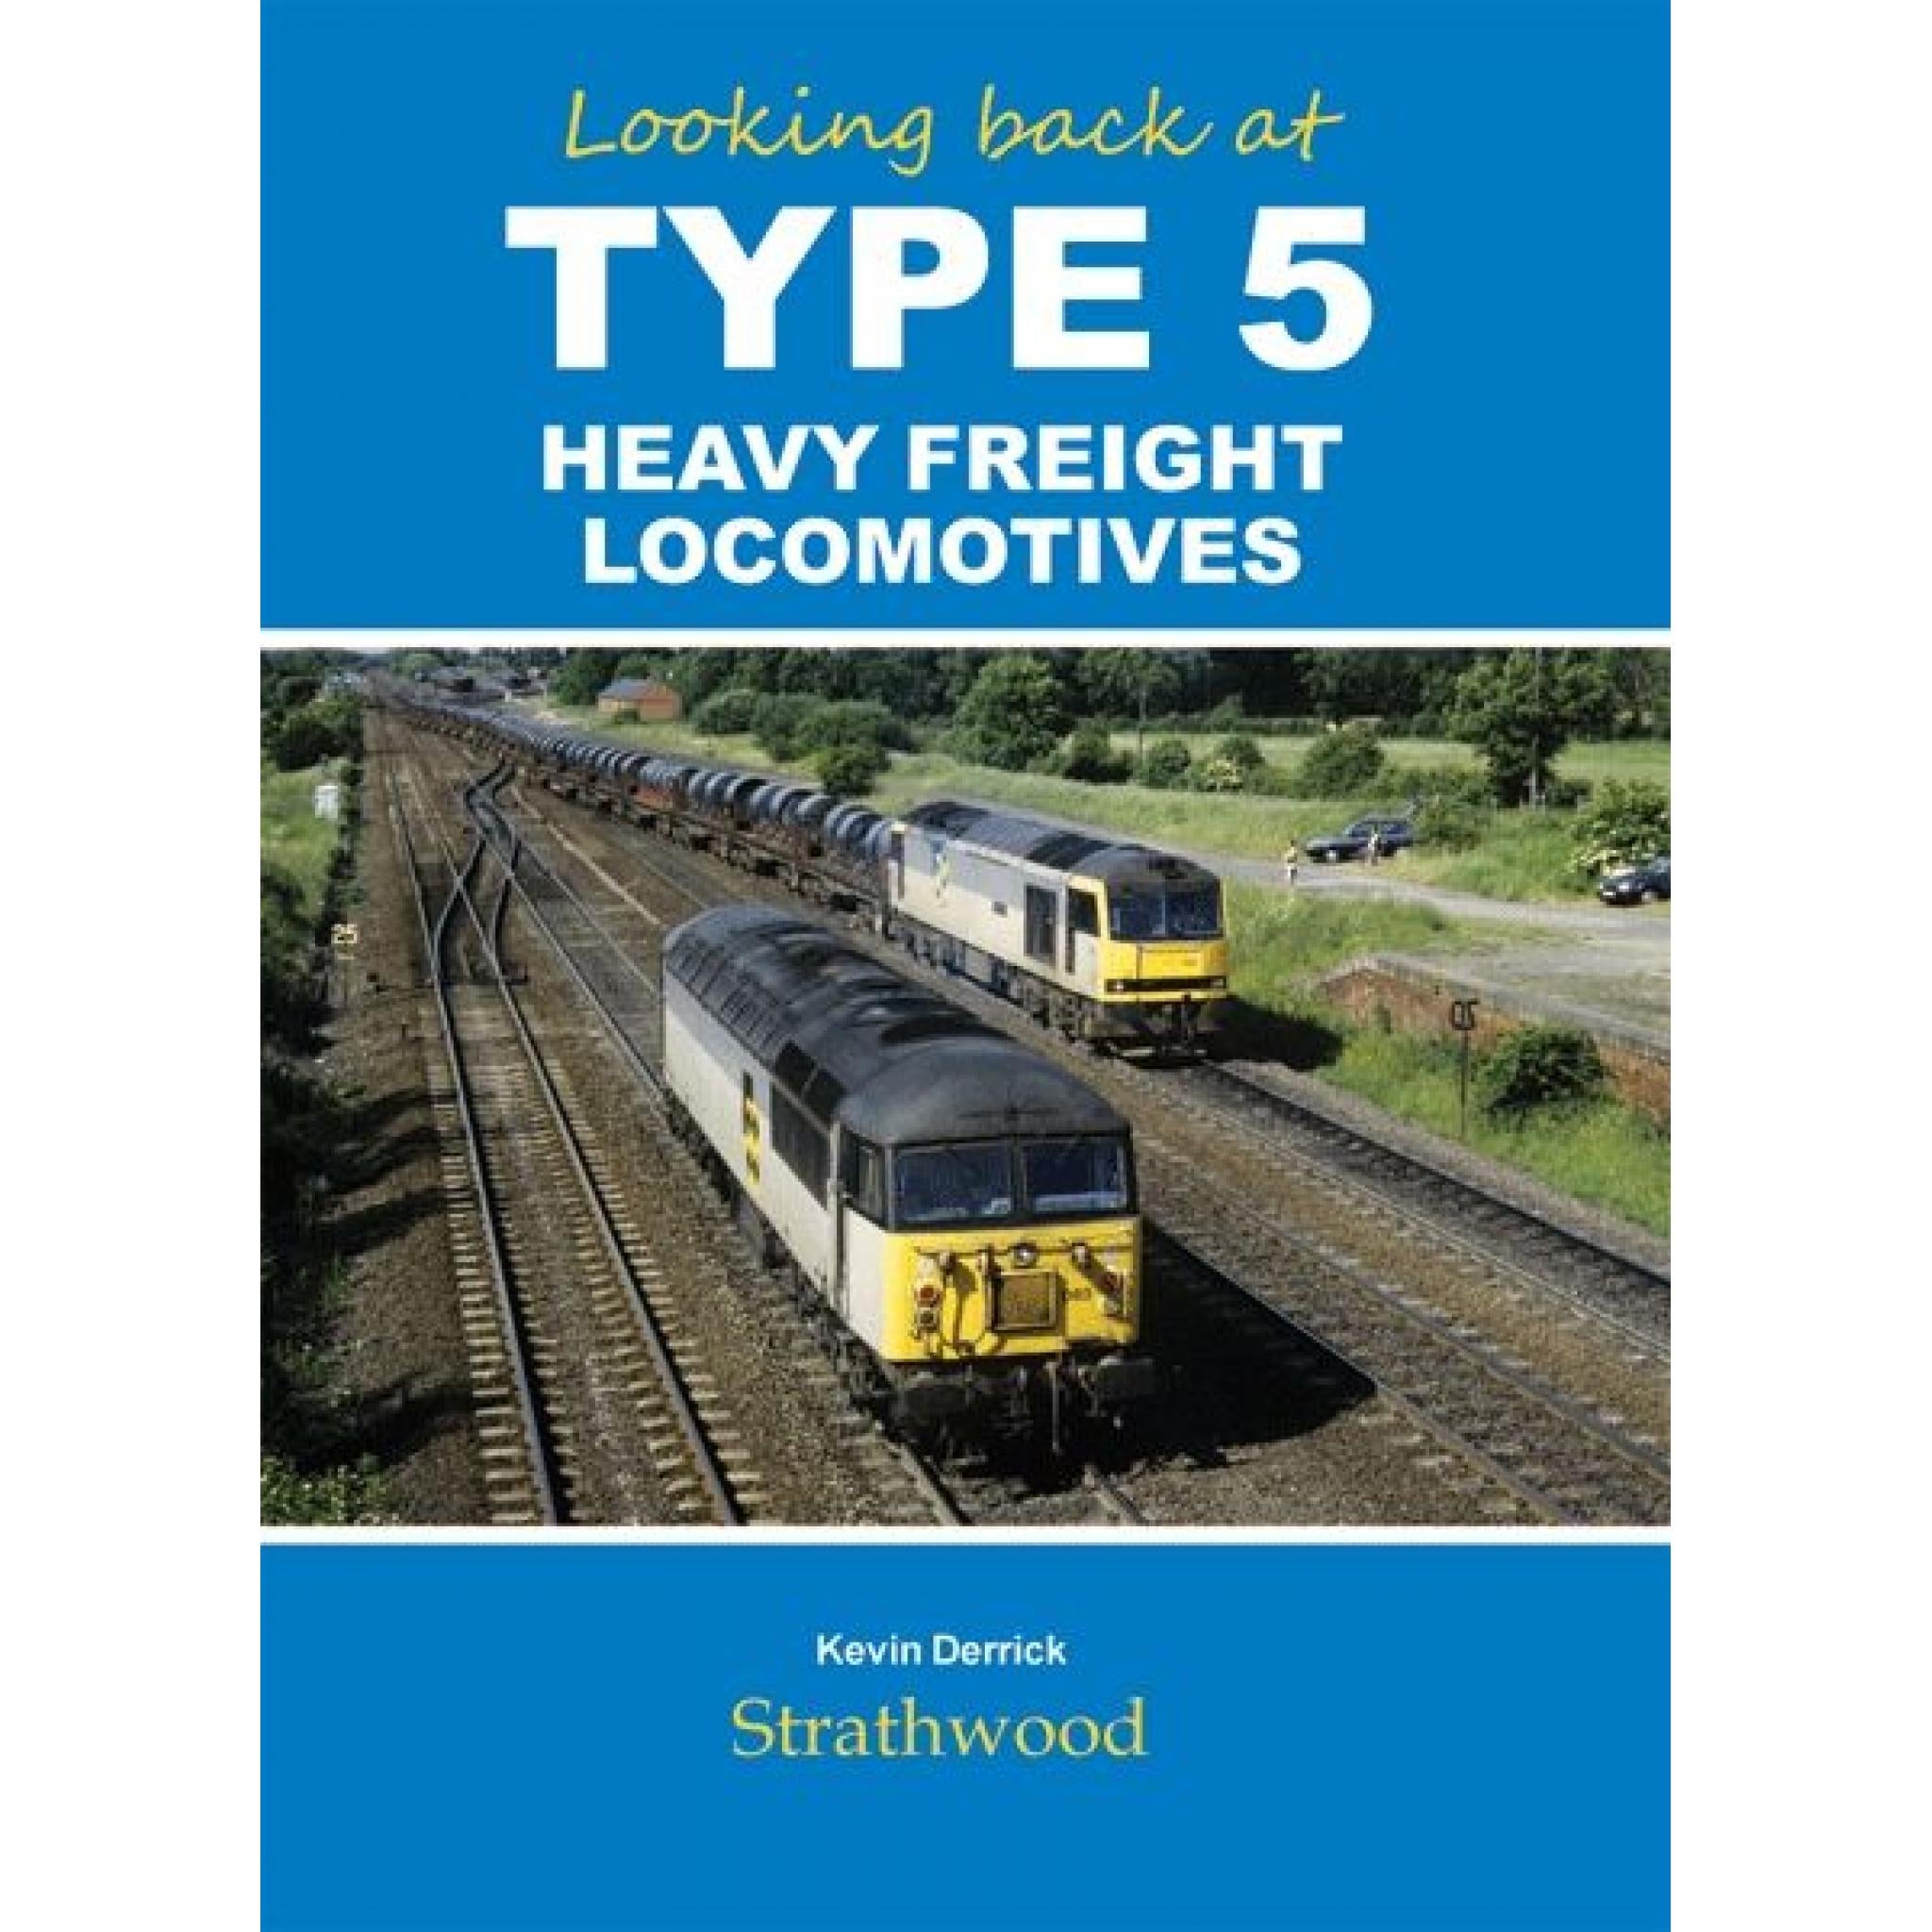 50% OFF RRP is £19.95  Looking back at TYPE 5 HEAVY FREIGHT LOCOMOTIVES